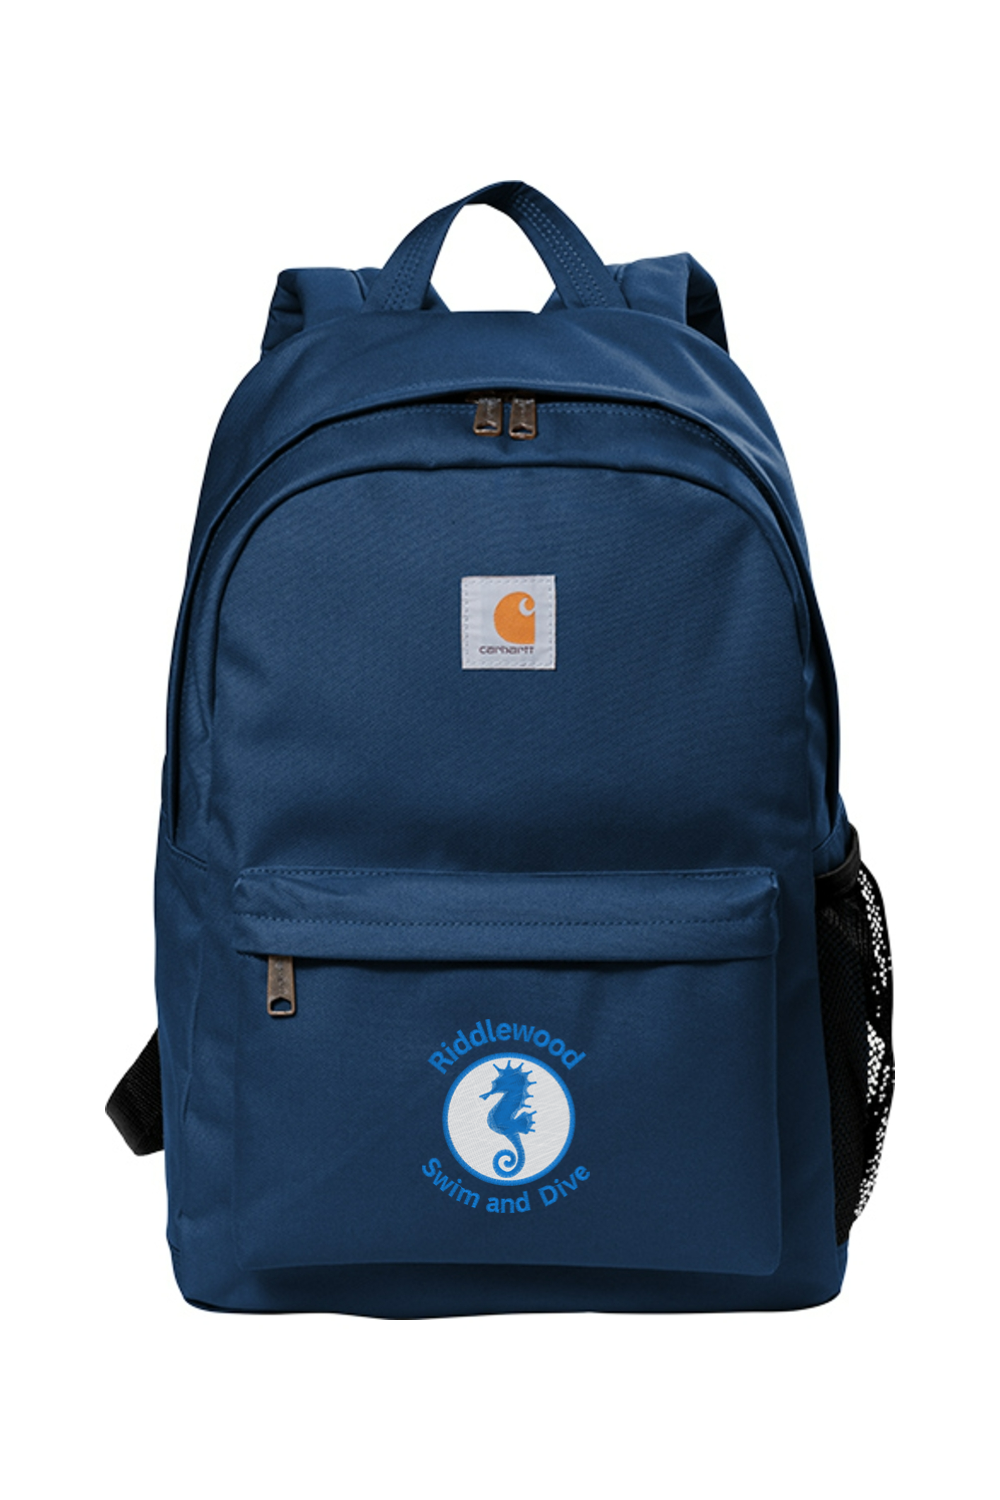 Riddlewood Carhartt Canvas Backpack